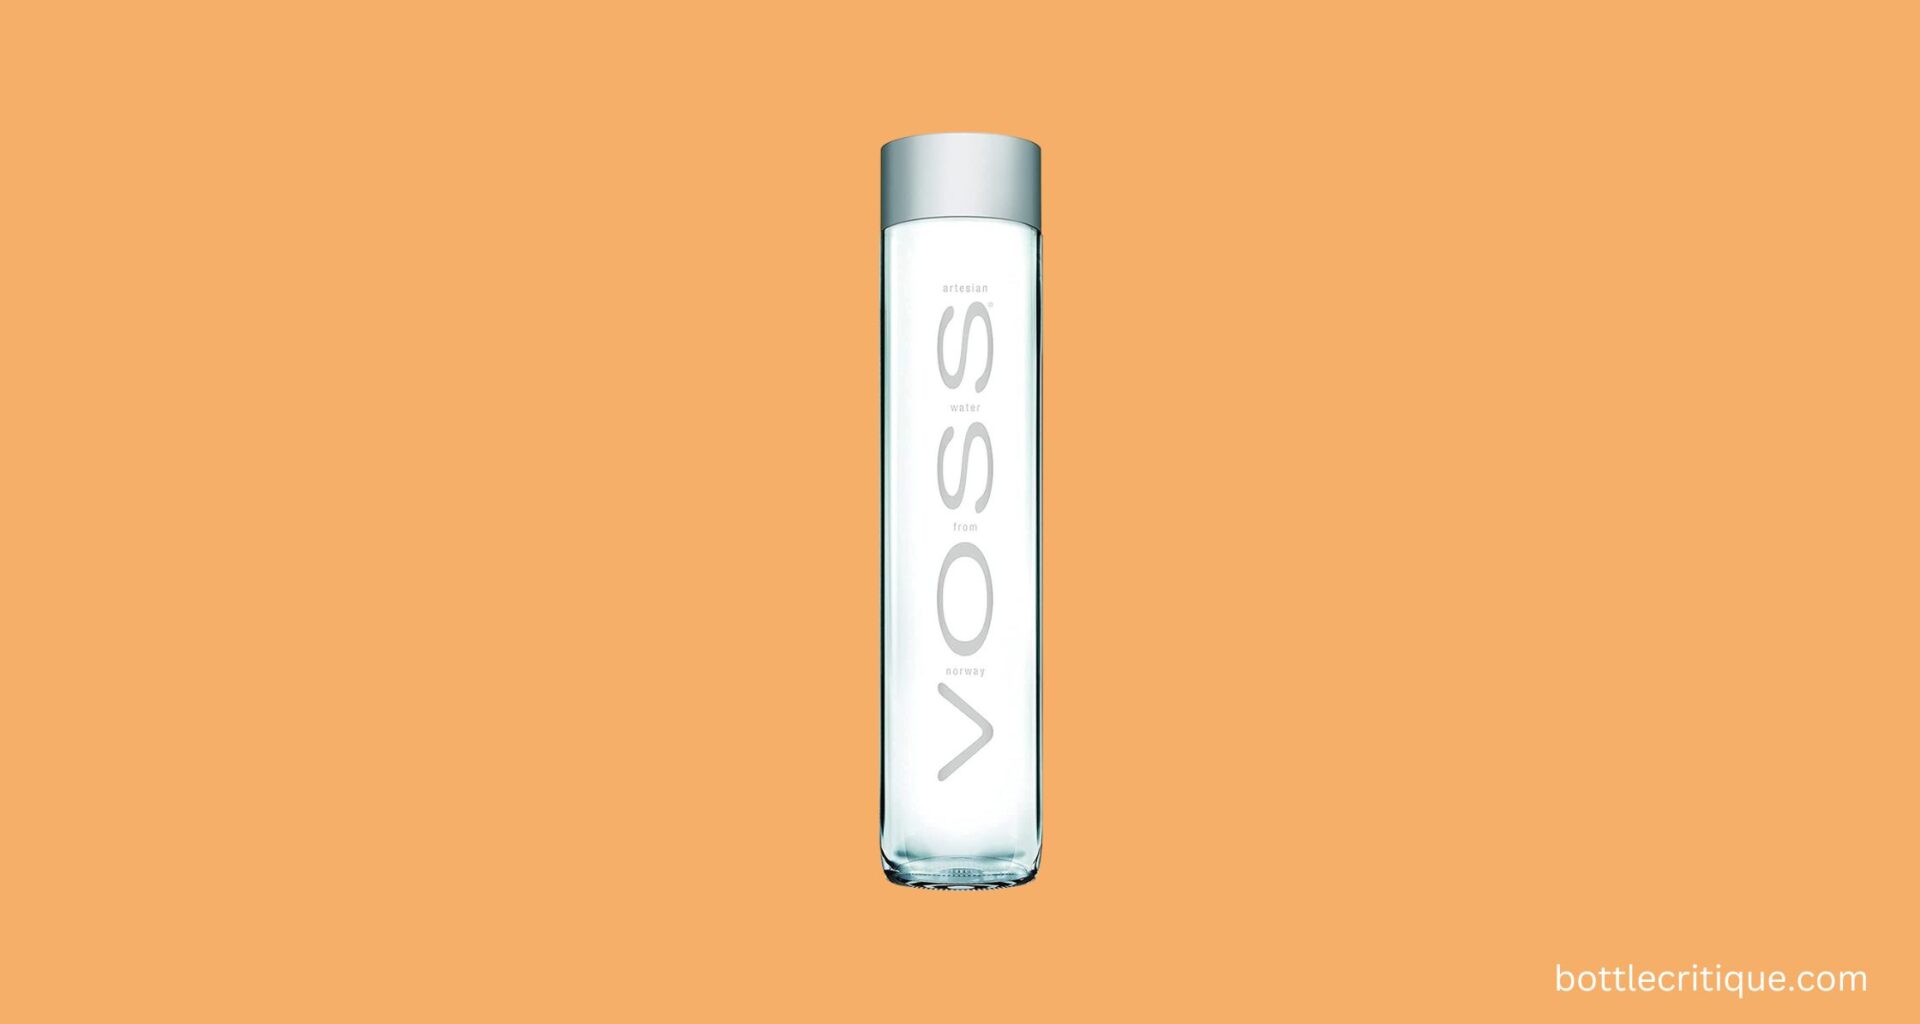 How to Remove Label from Voss Water Bottle?